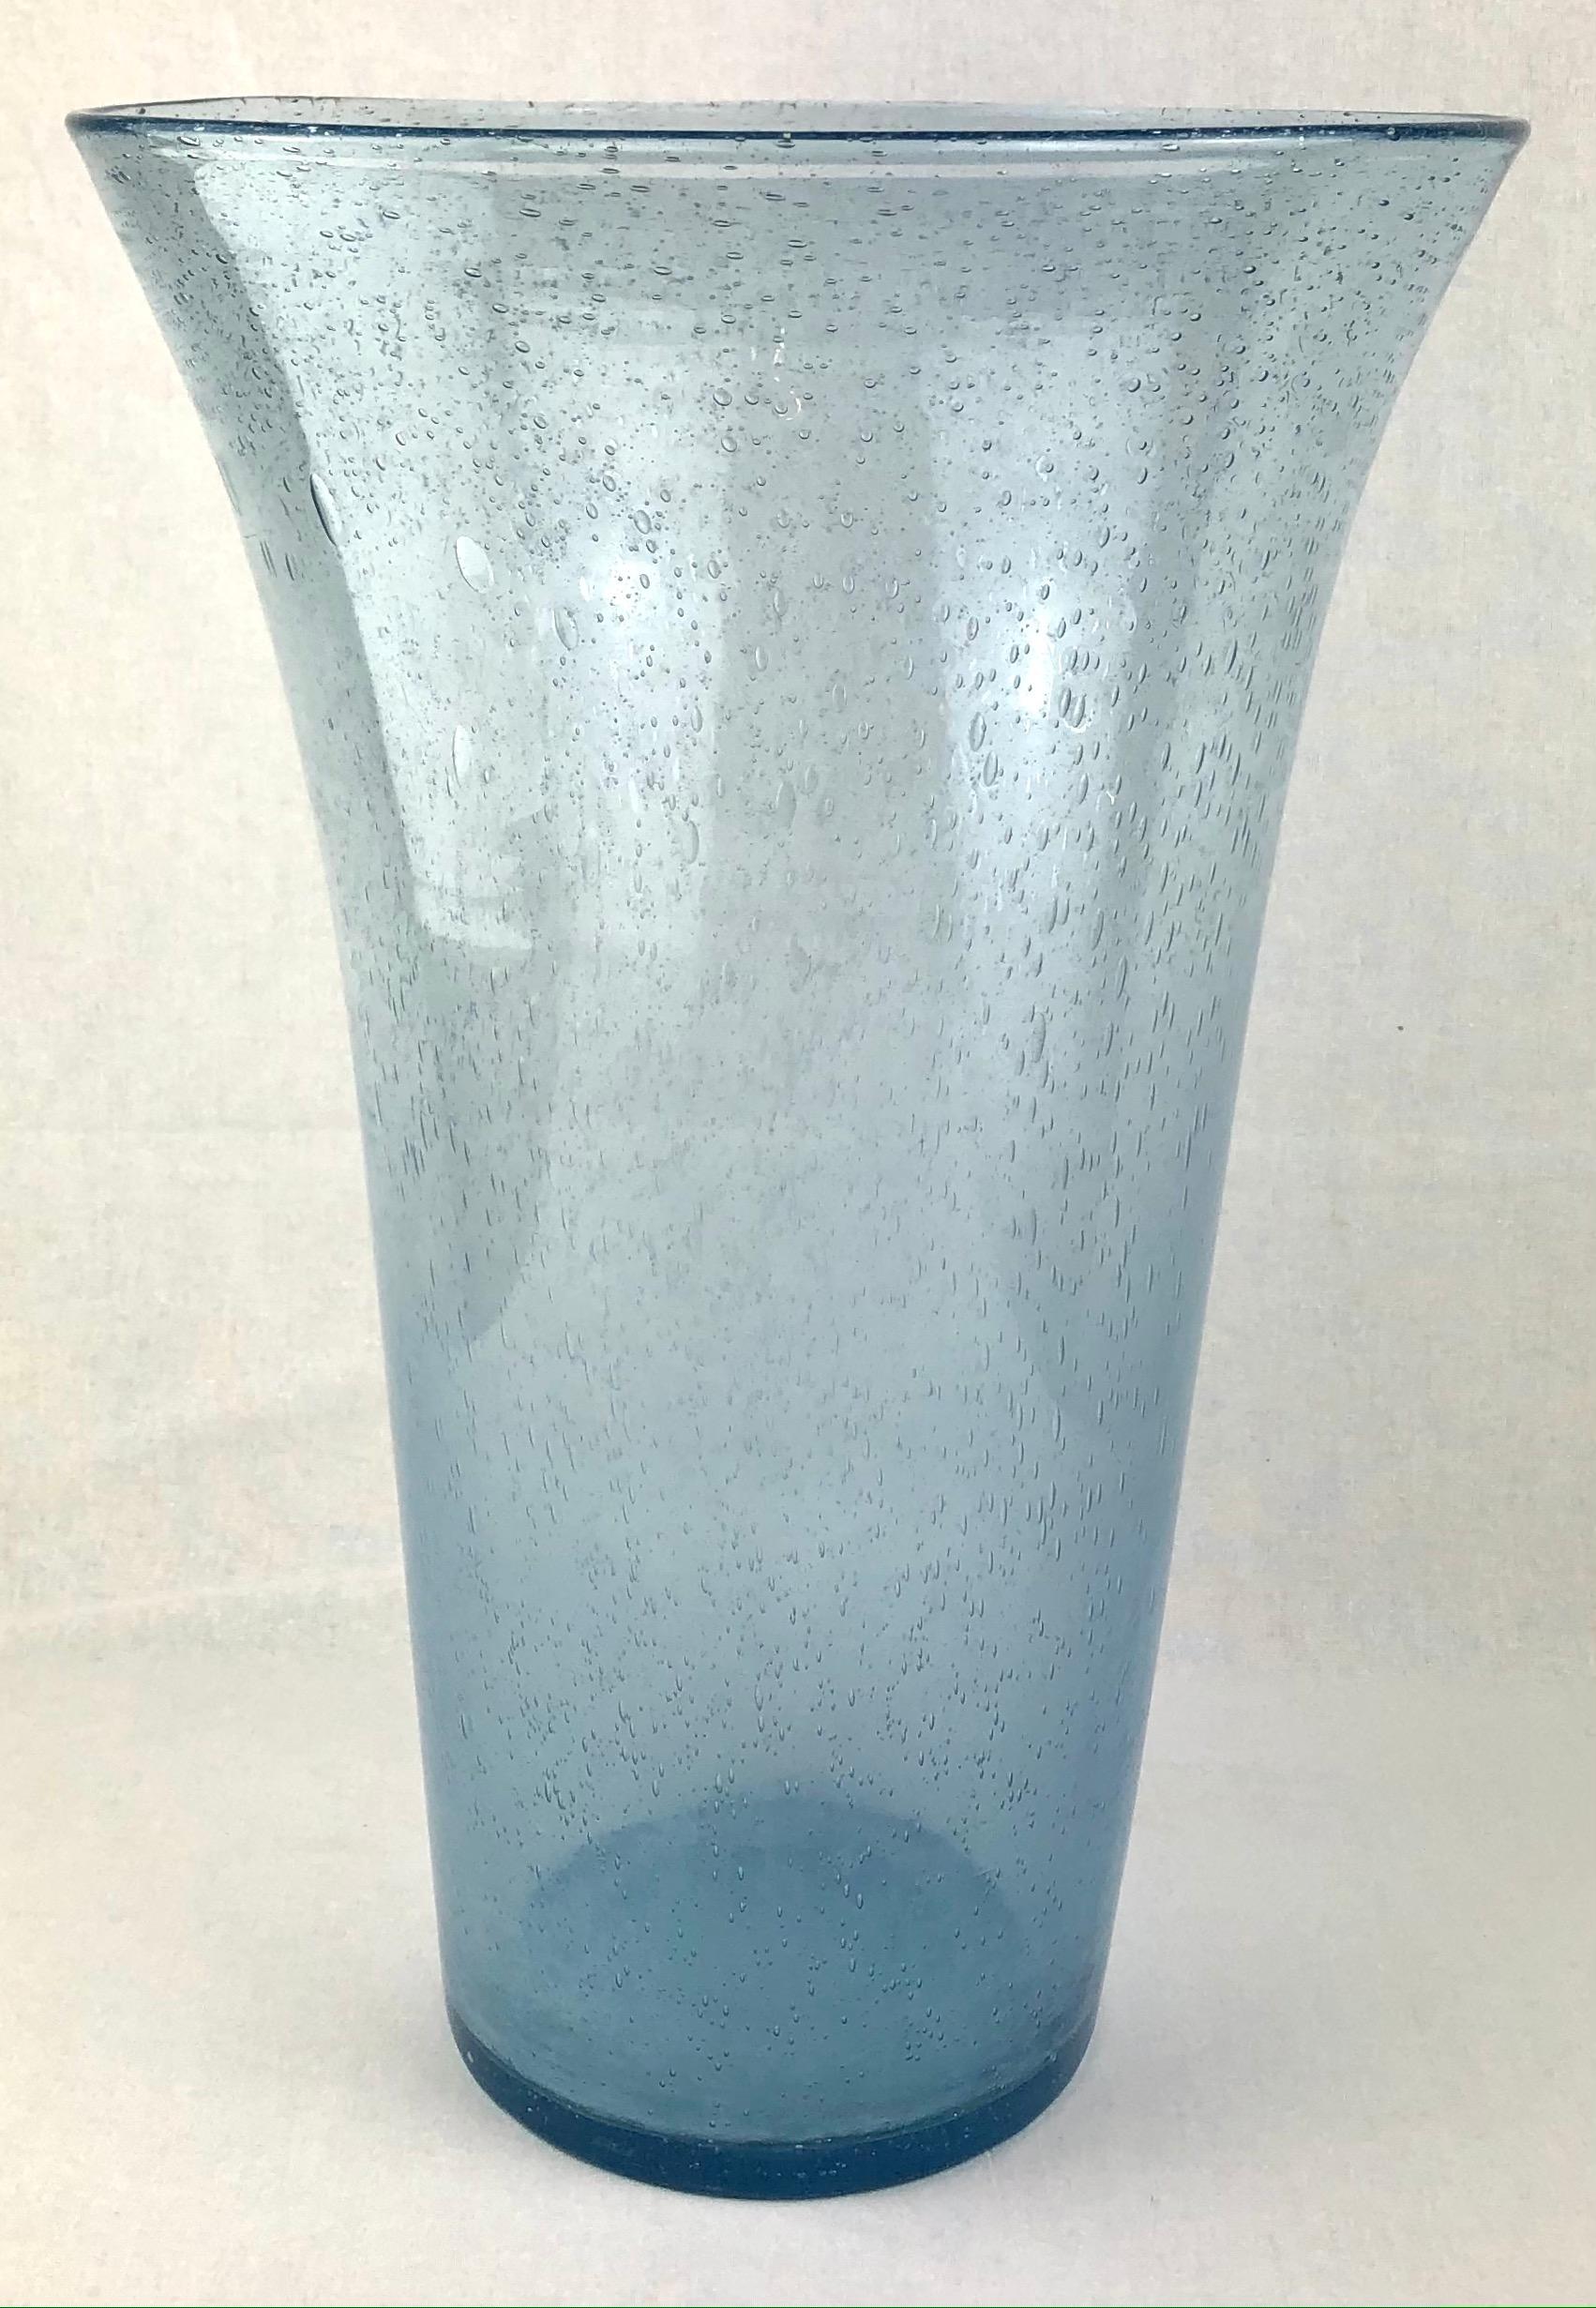 Hand-Crafted Large Translucent Blue Murano Art Glass Vase with Bubble Inclusions